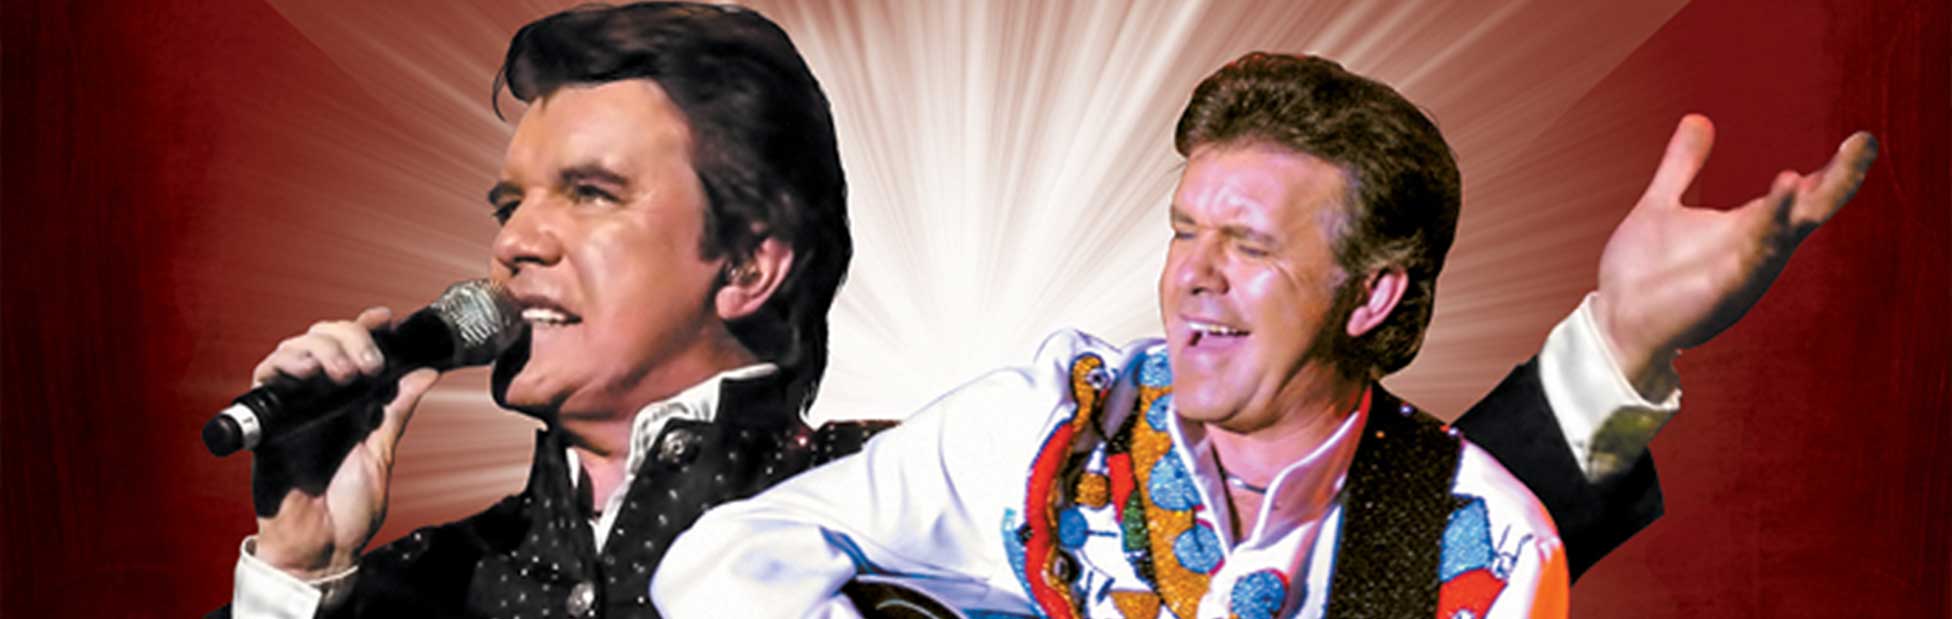 Two images of performer dressed as Neil Diamond